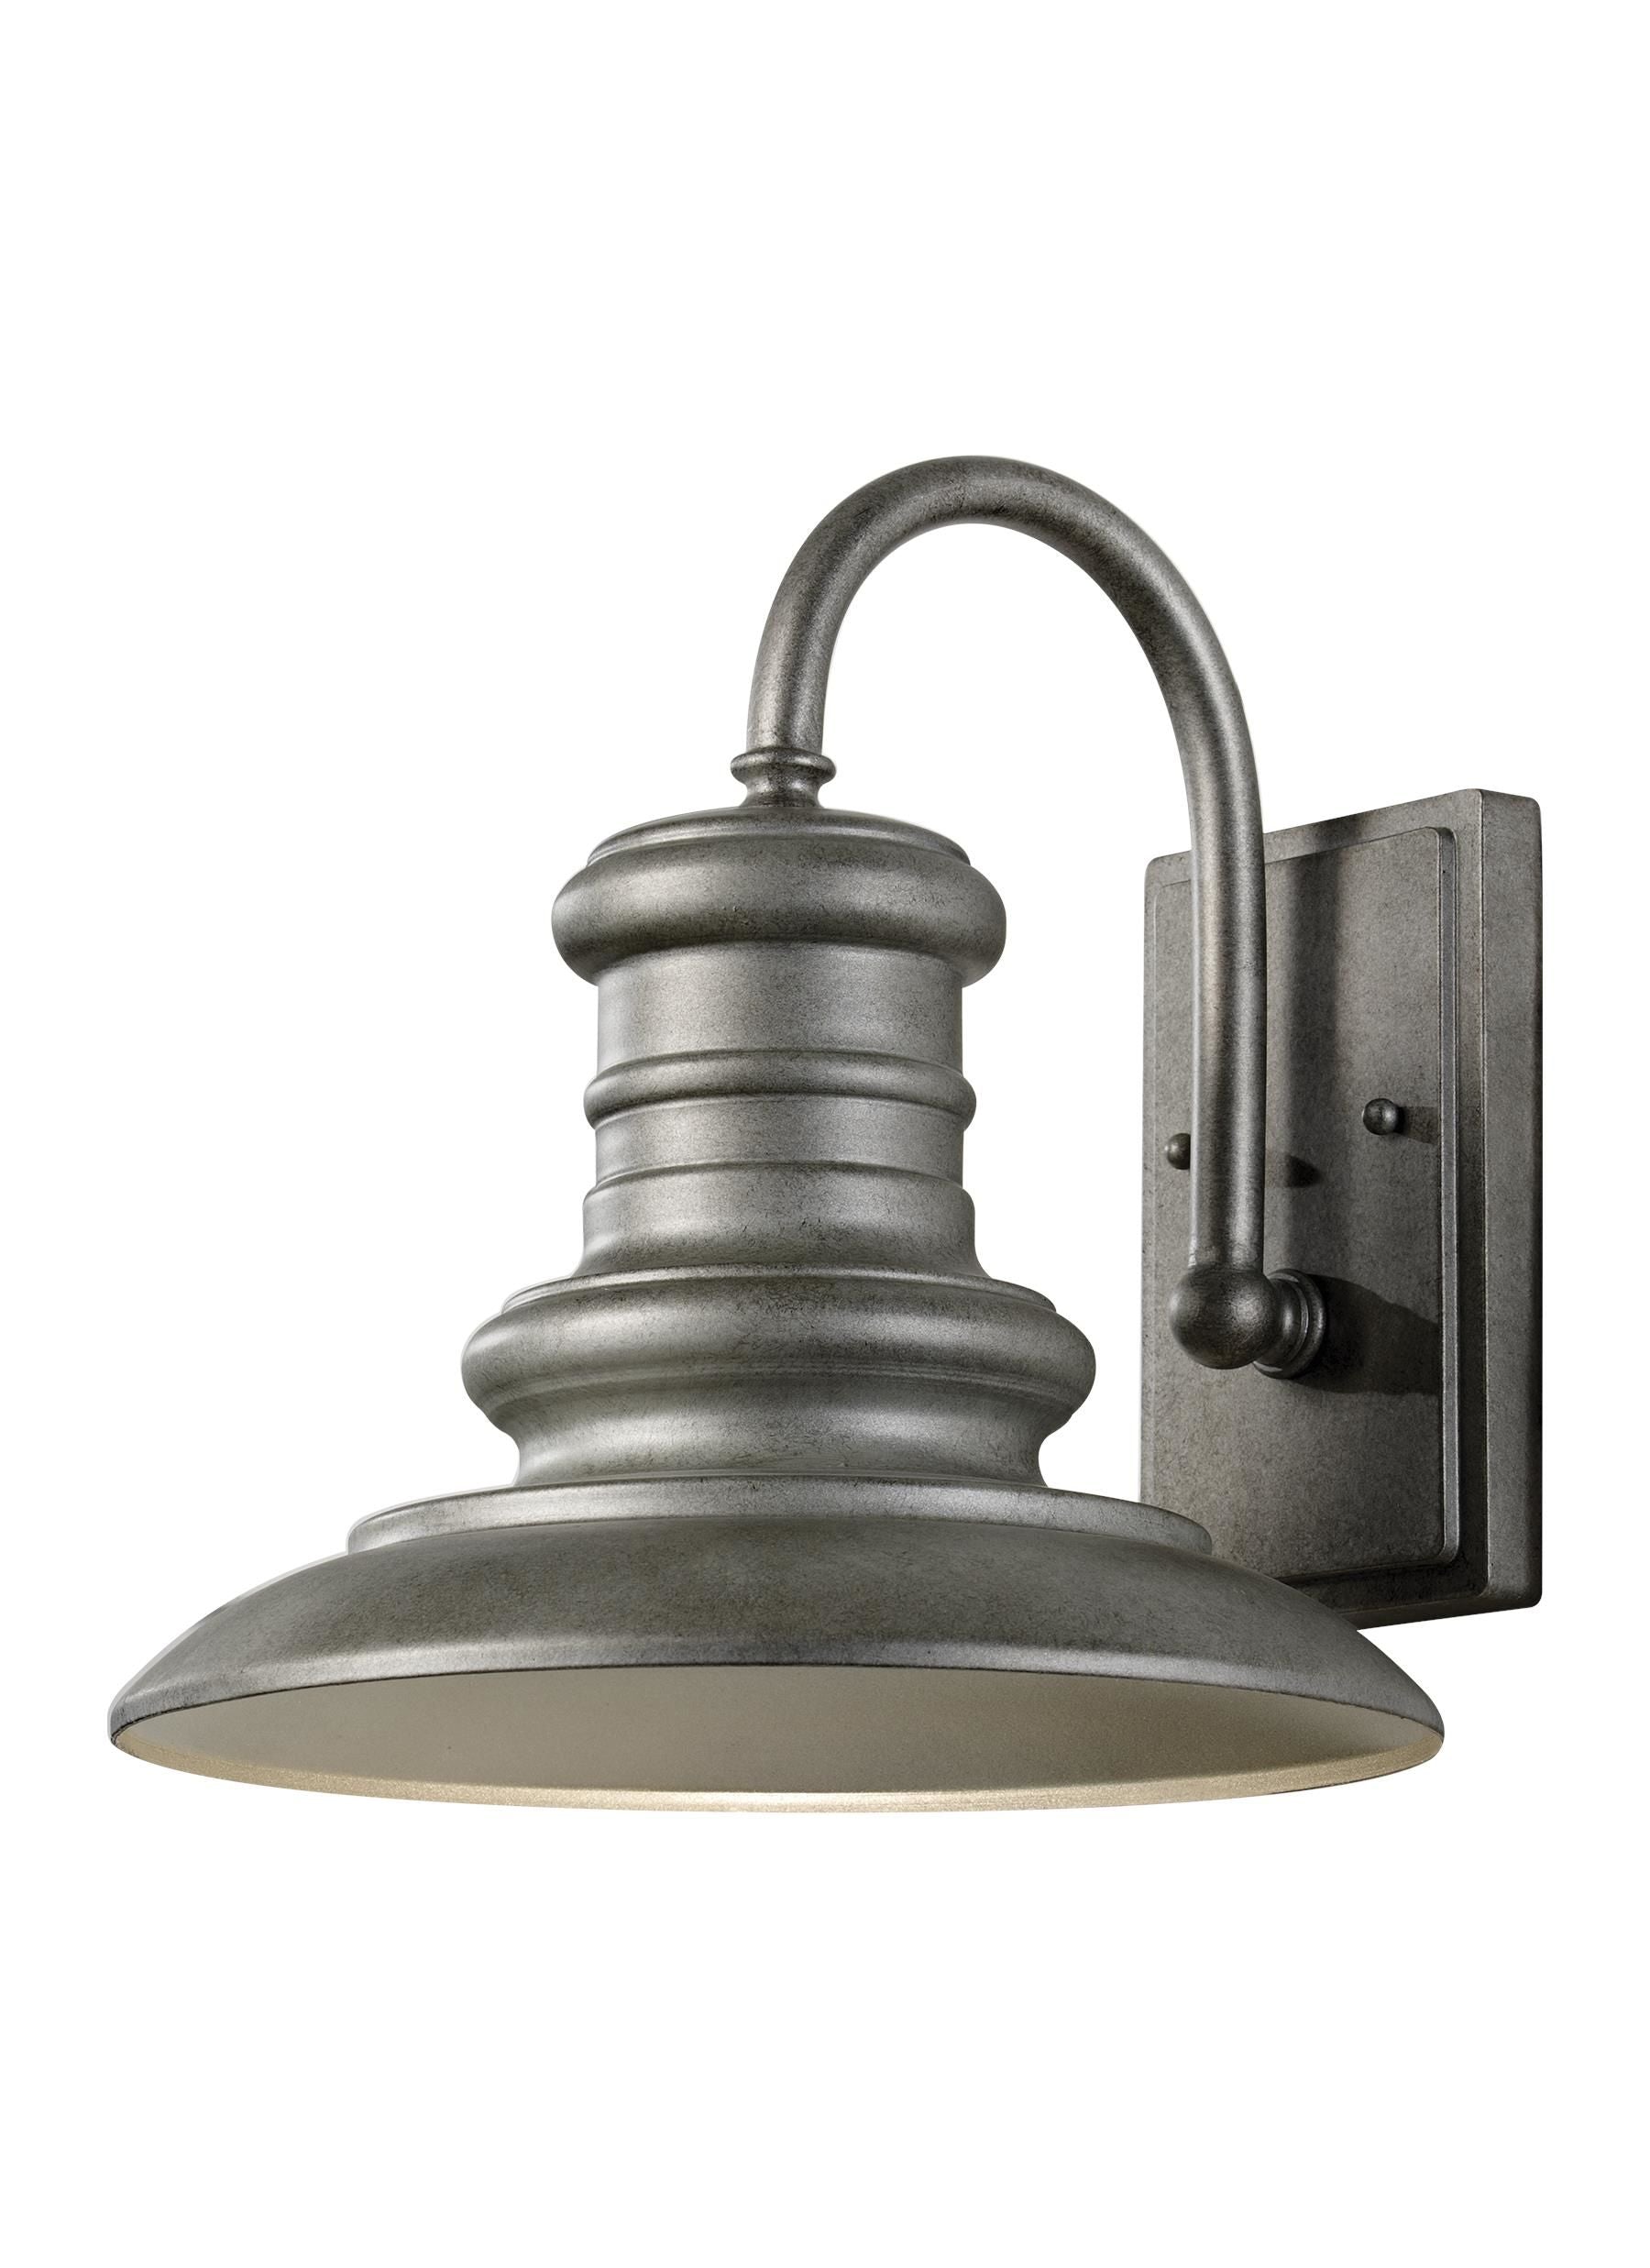 Redding Station Outdoor sconce Stainless steel INTEGRATED LED - OL8601TRD-L1 | FEISS